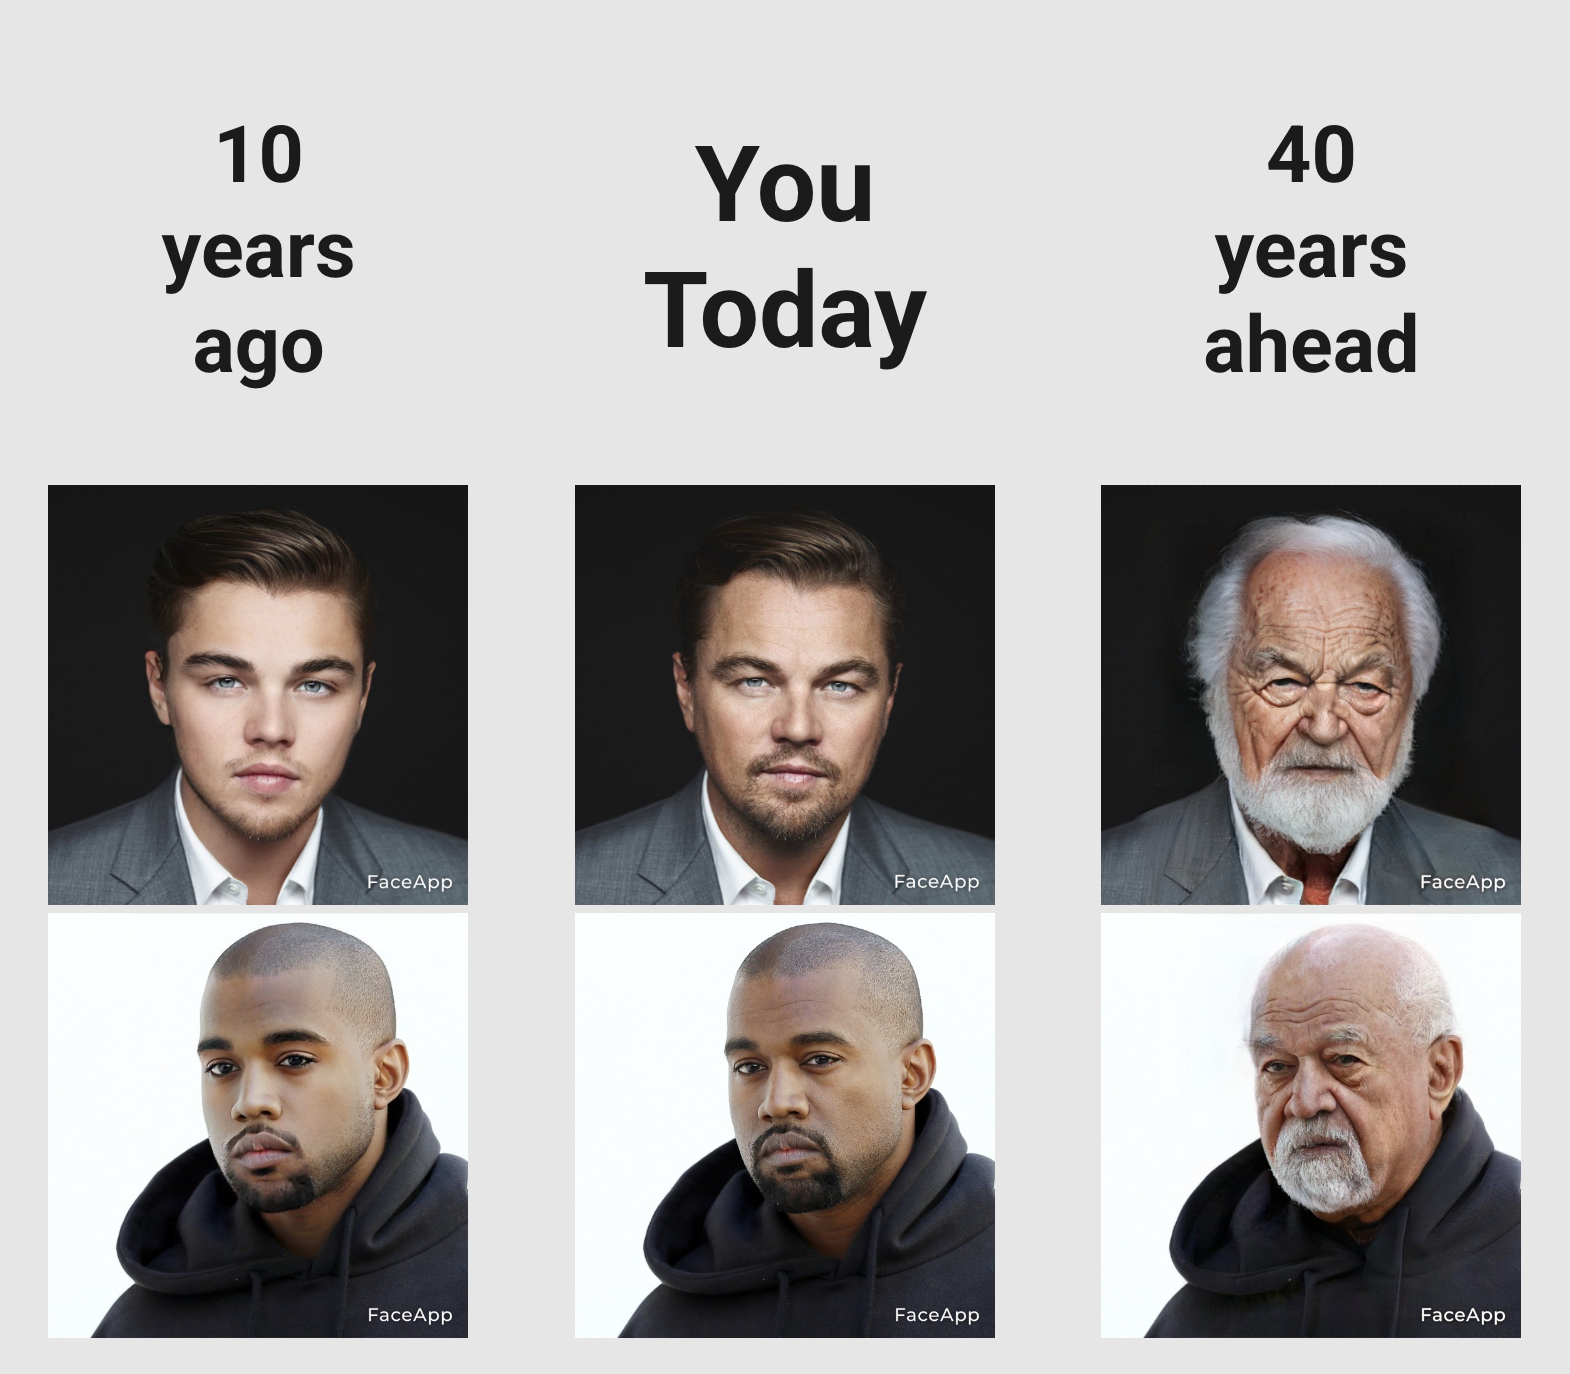 Example of the photos converted using the FaceApp. Leonardo DiCaprio and Kanye West and shown in three photos each. From left to right, they appear as young as 10 years ago, as they are Today, and as they would look like 40 years from now.